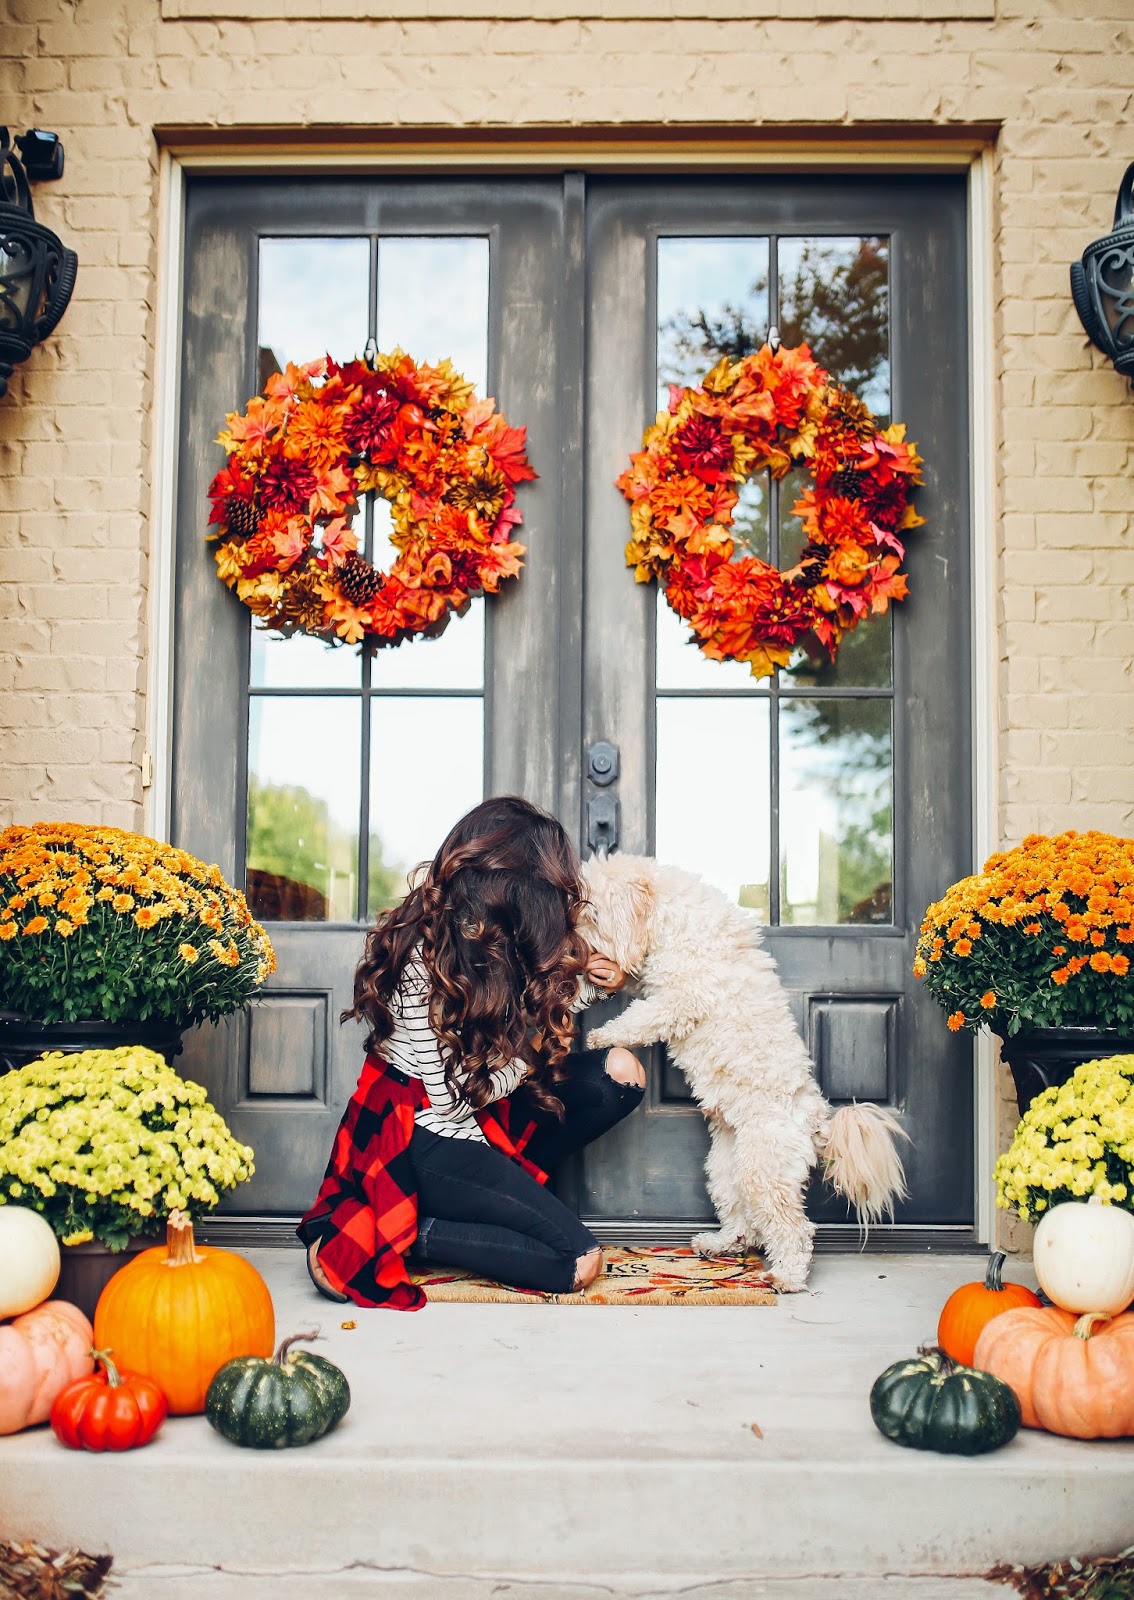 Our Fall Front Porch Decor | The Sweetest Thing